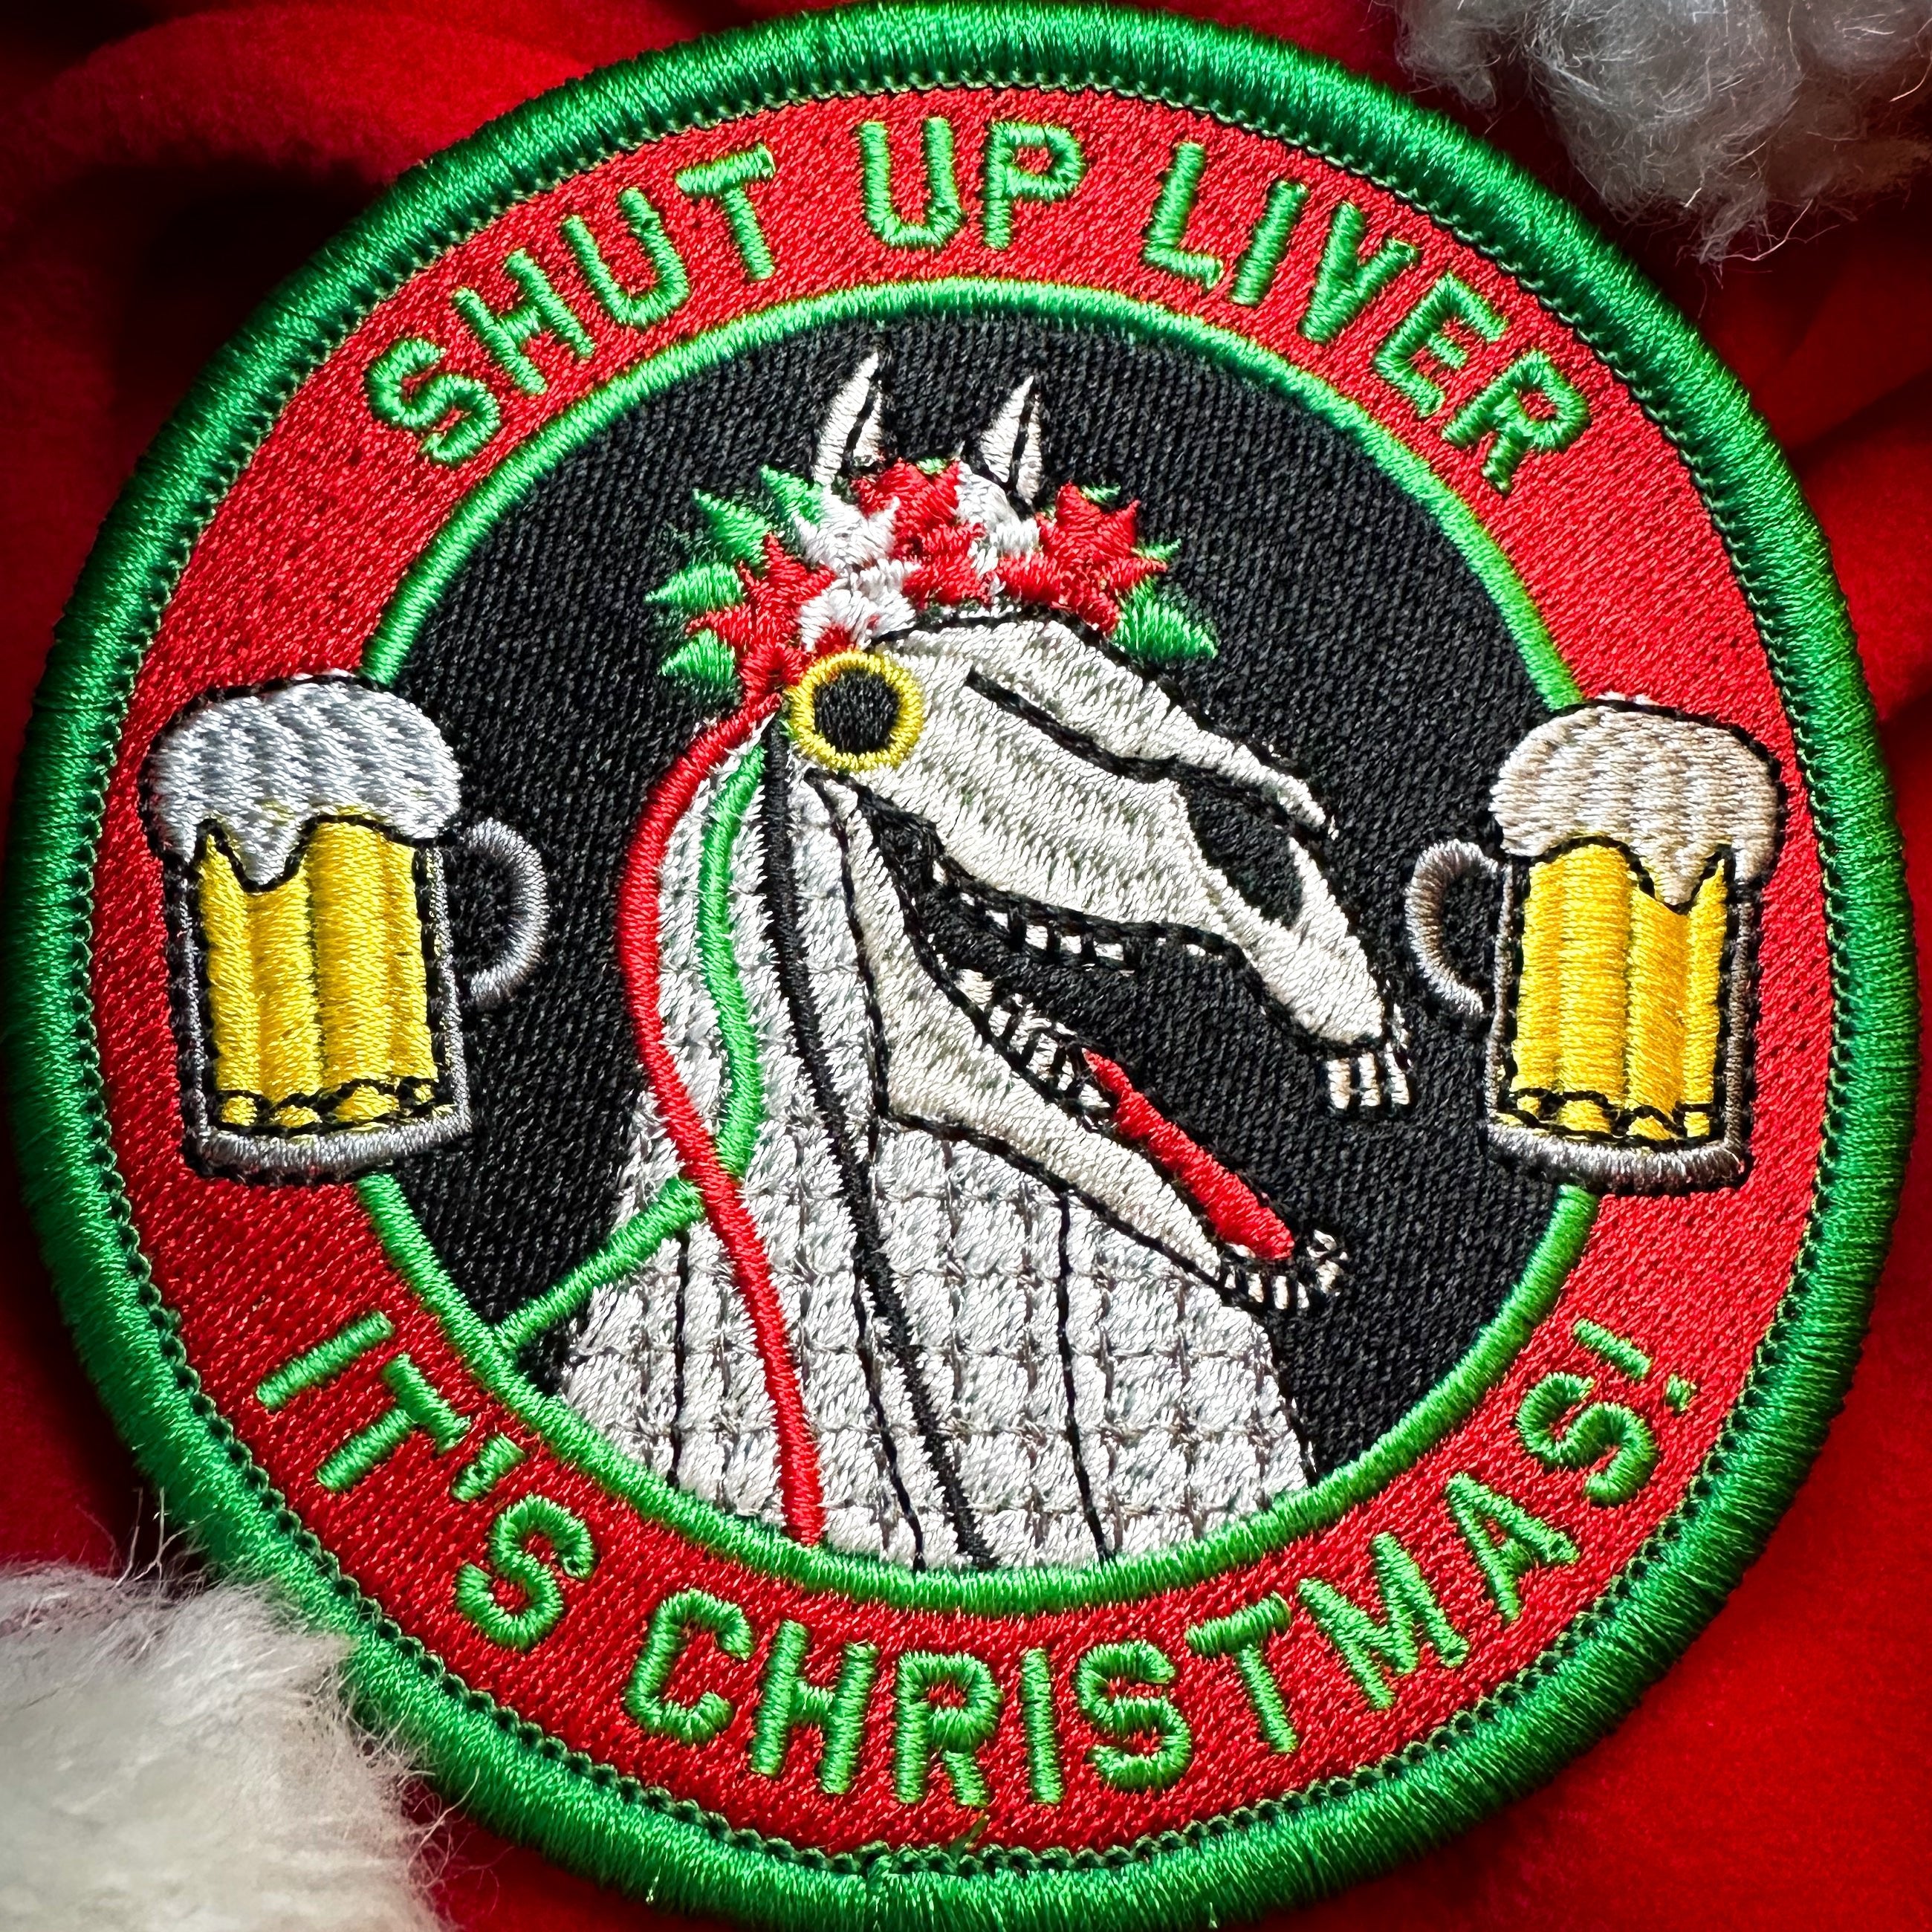 Mari Lwyd Tradition Embodied: 4-Inch Embroidered Patch - Welsh Folklore Tribute - Shut up Liver it's Christmas